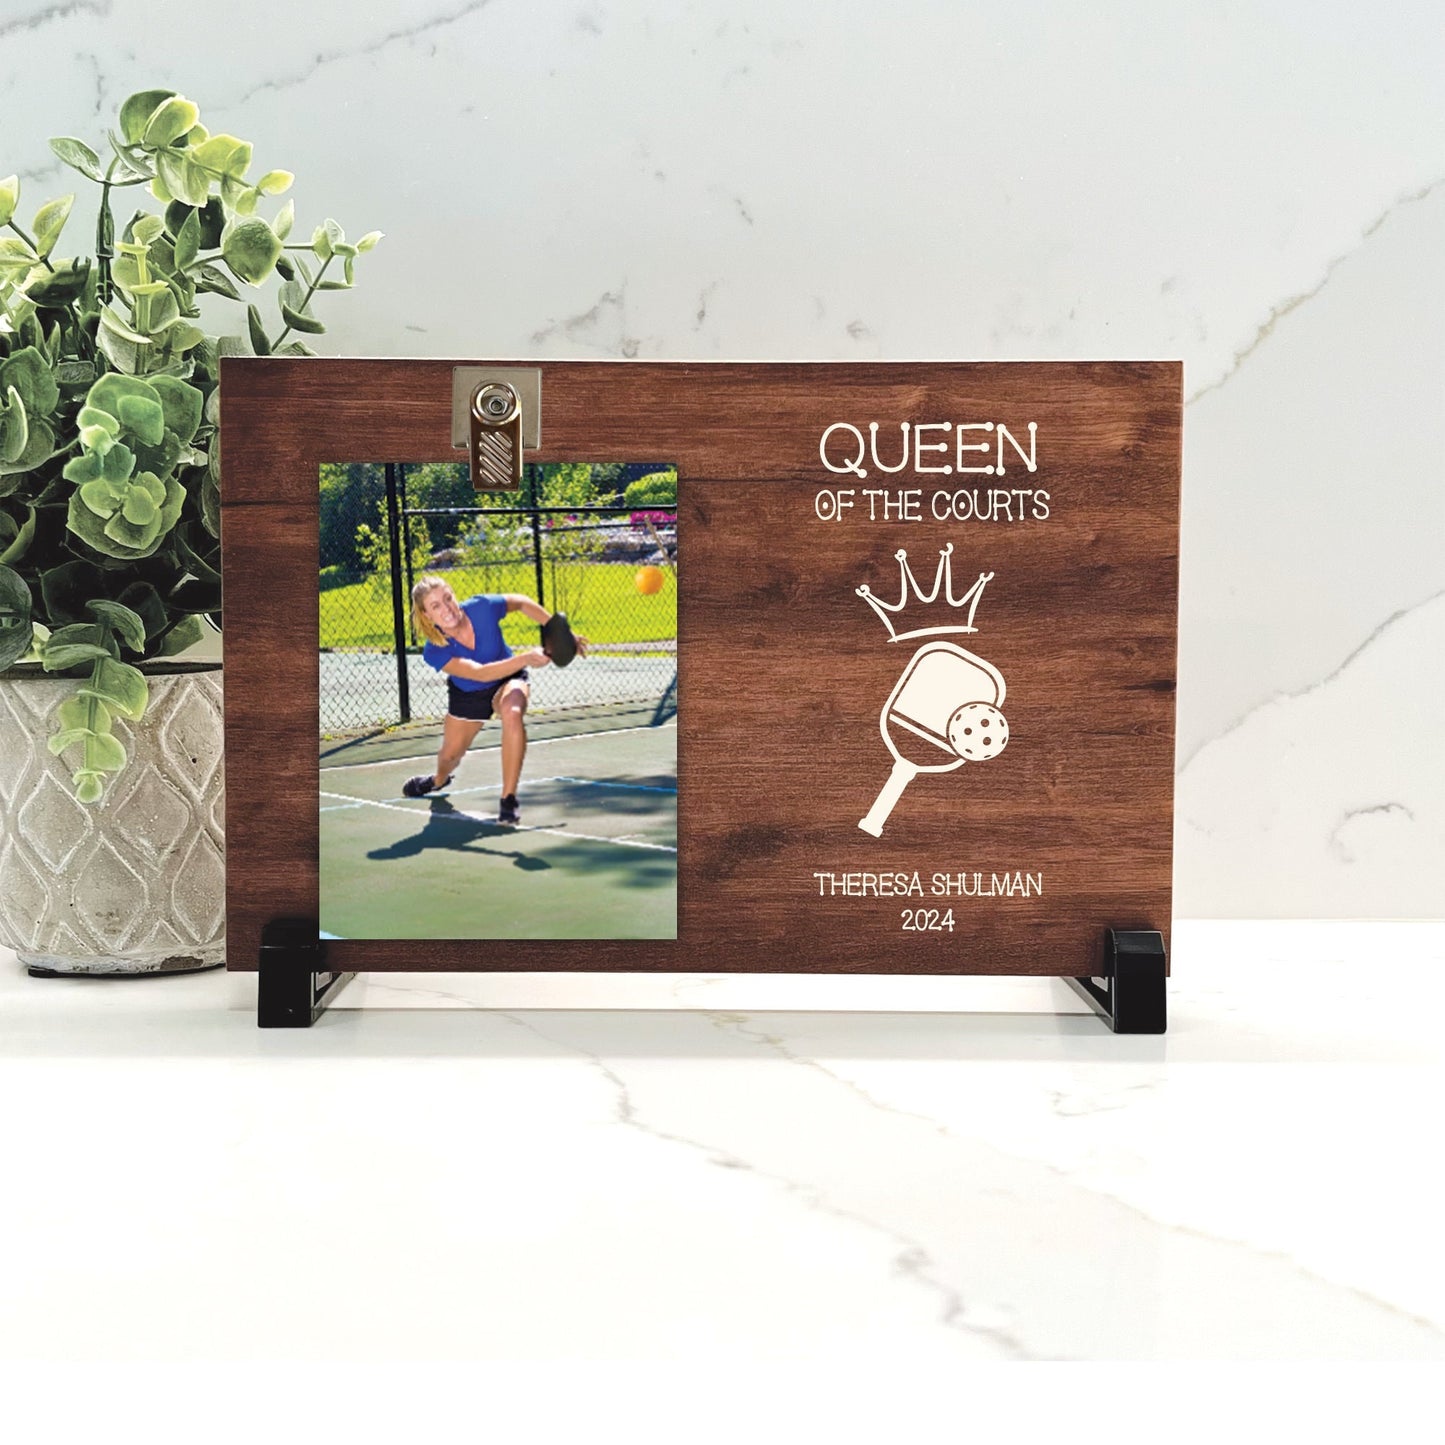 Customize your cherished moments with our Pickleball Personalized Picture Frame available at www.florida-funshine.com. Create a heartfelt gift for family and friends with free personalization, quick shipping in 1-2 business days, and quality crafted picture frames, portraits, and plaques made in the USA."